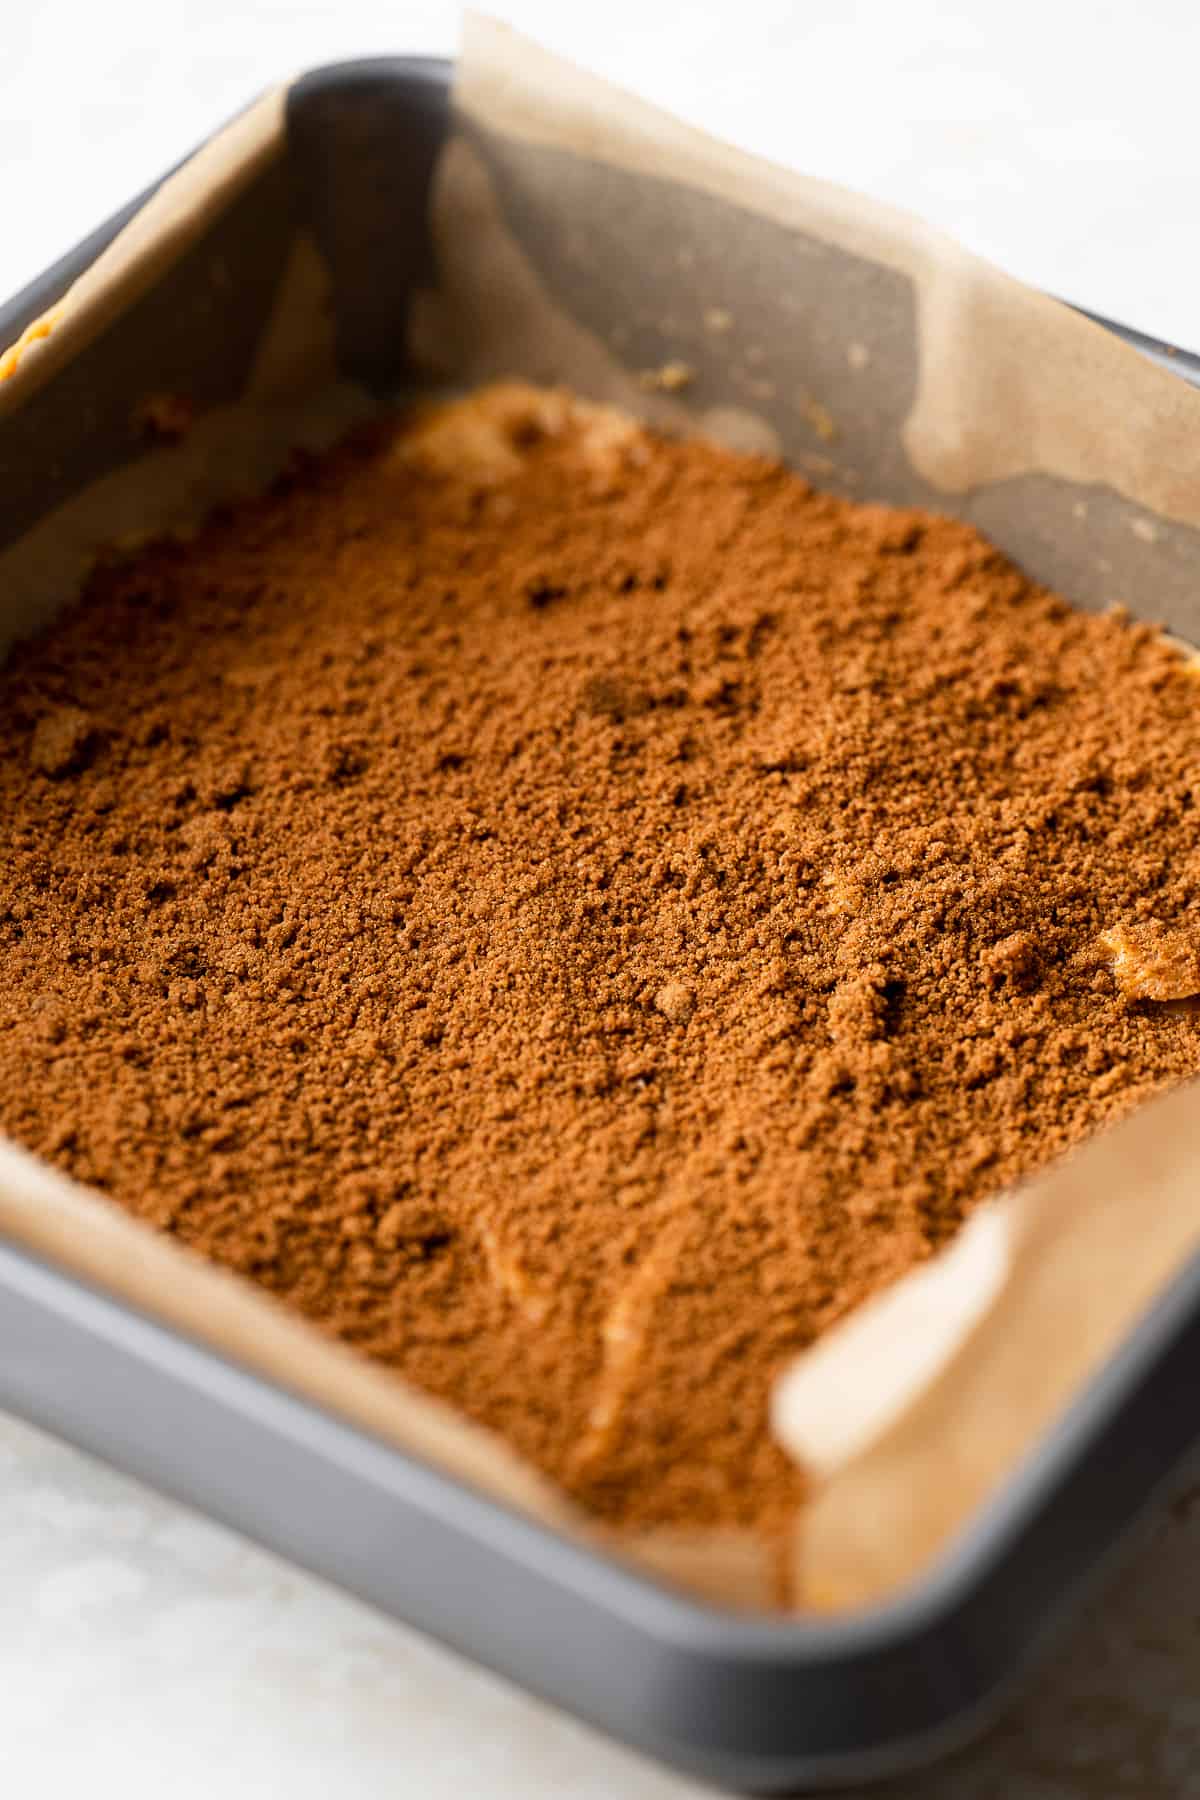 cinnamon sugar being spread across the first layer of pumpkin cake batter.